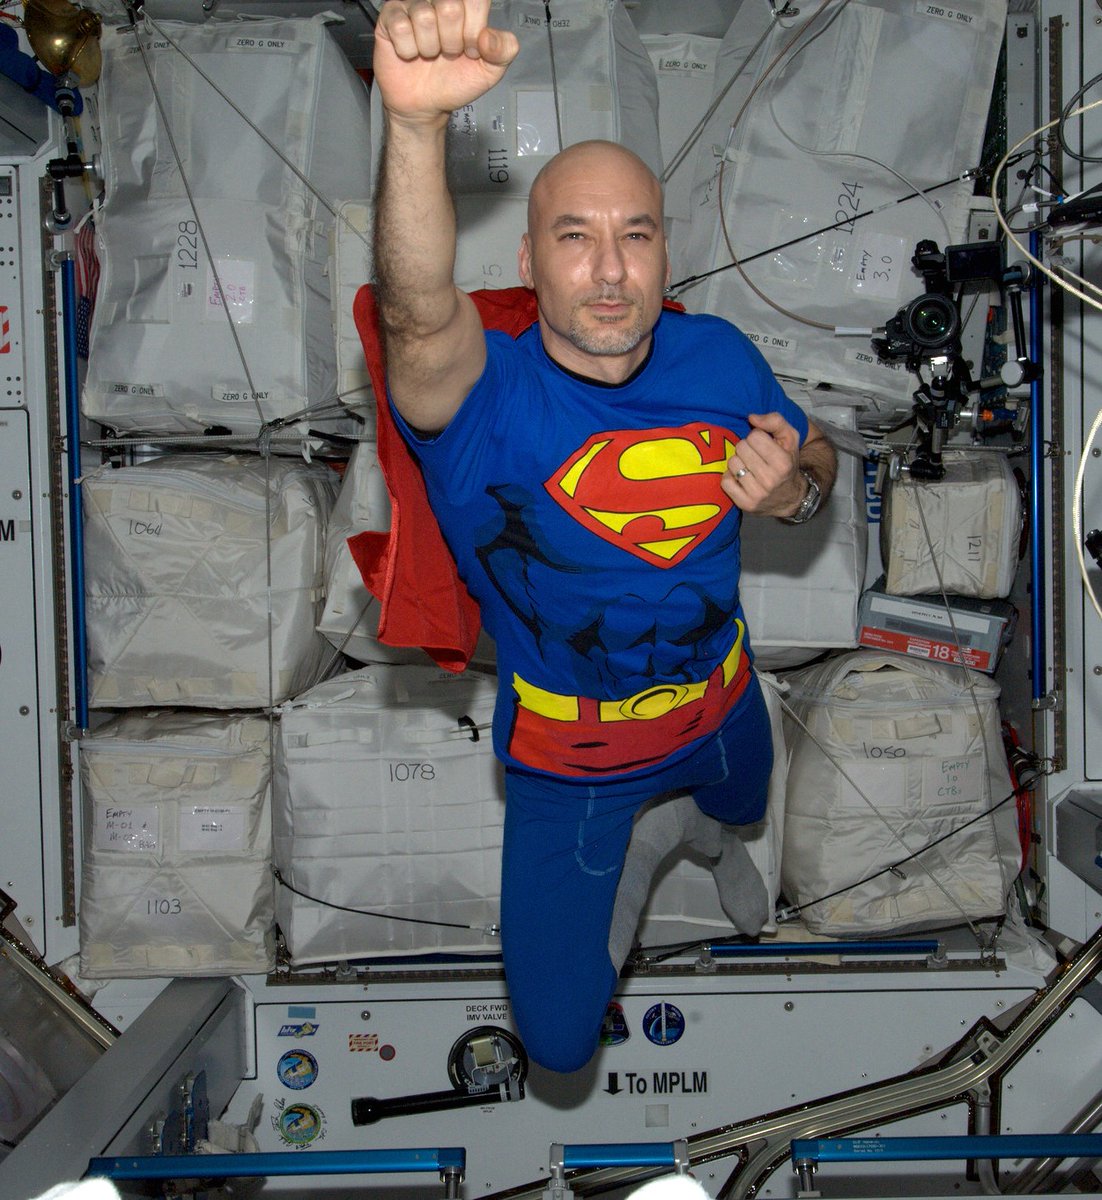 Astronauts get to join in the Halloween fun from 250 miles up! #OTD in 2013, @esa astronaut Luca Parmitano soared across the @Space_Station in a single bound, revealing his secret identity. #HappyHalloween! 🎃